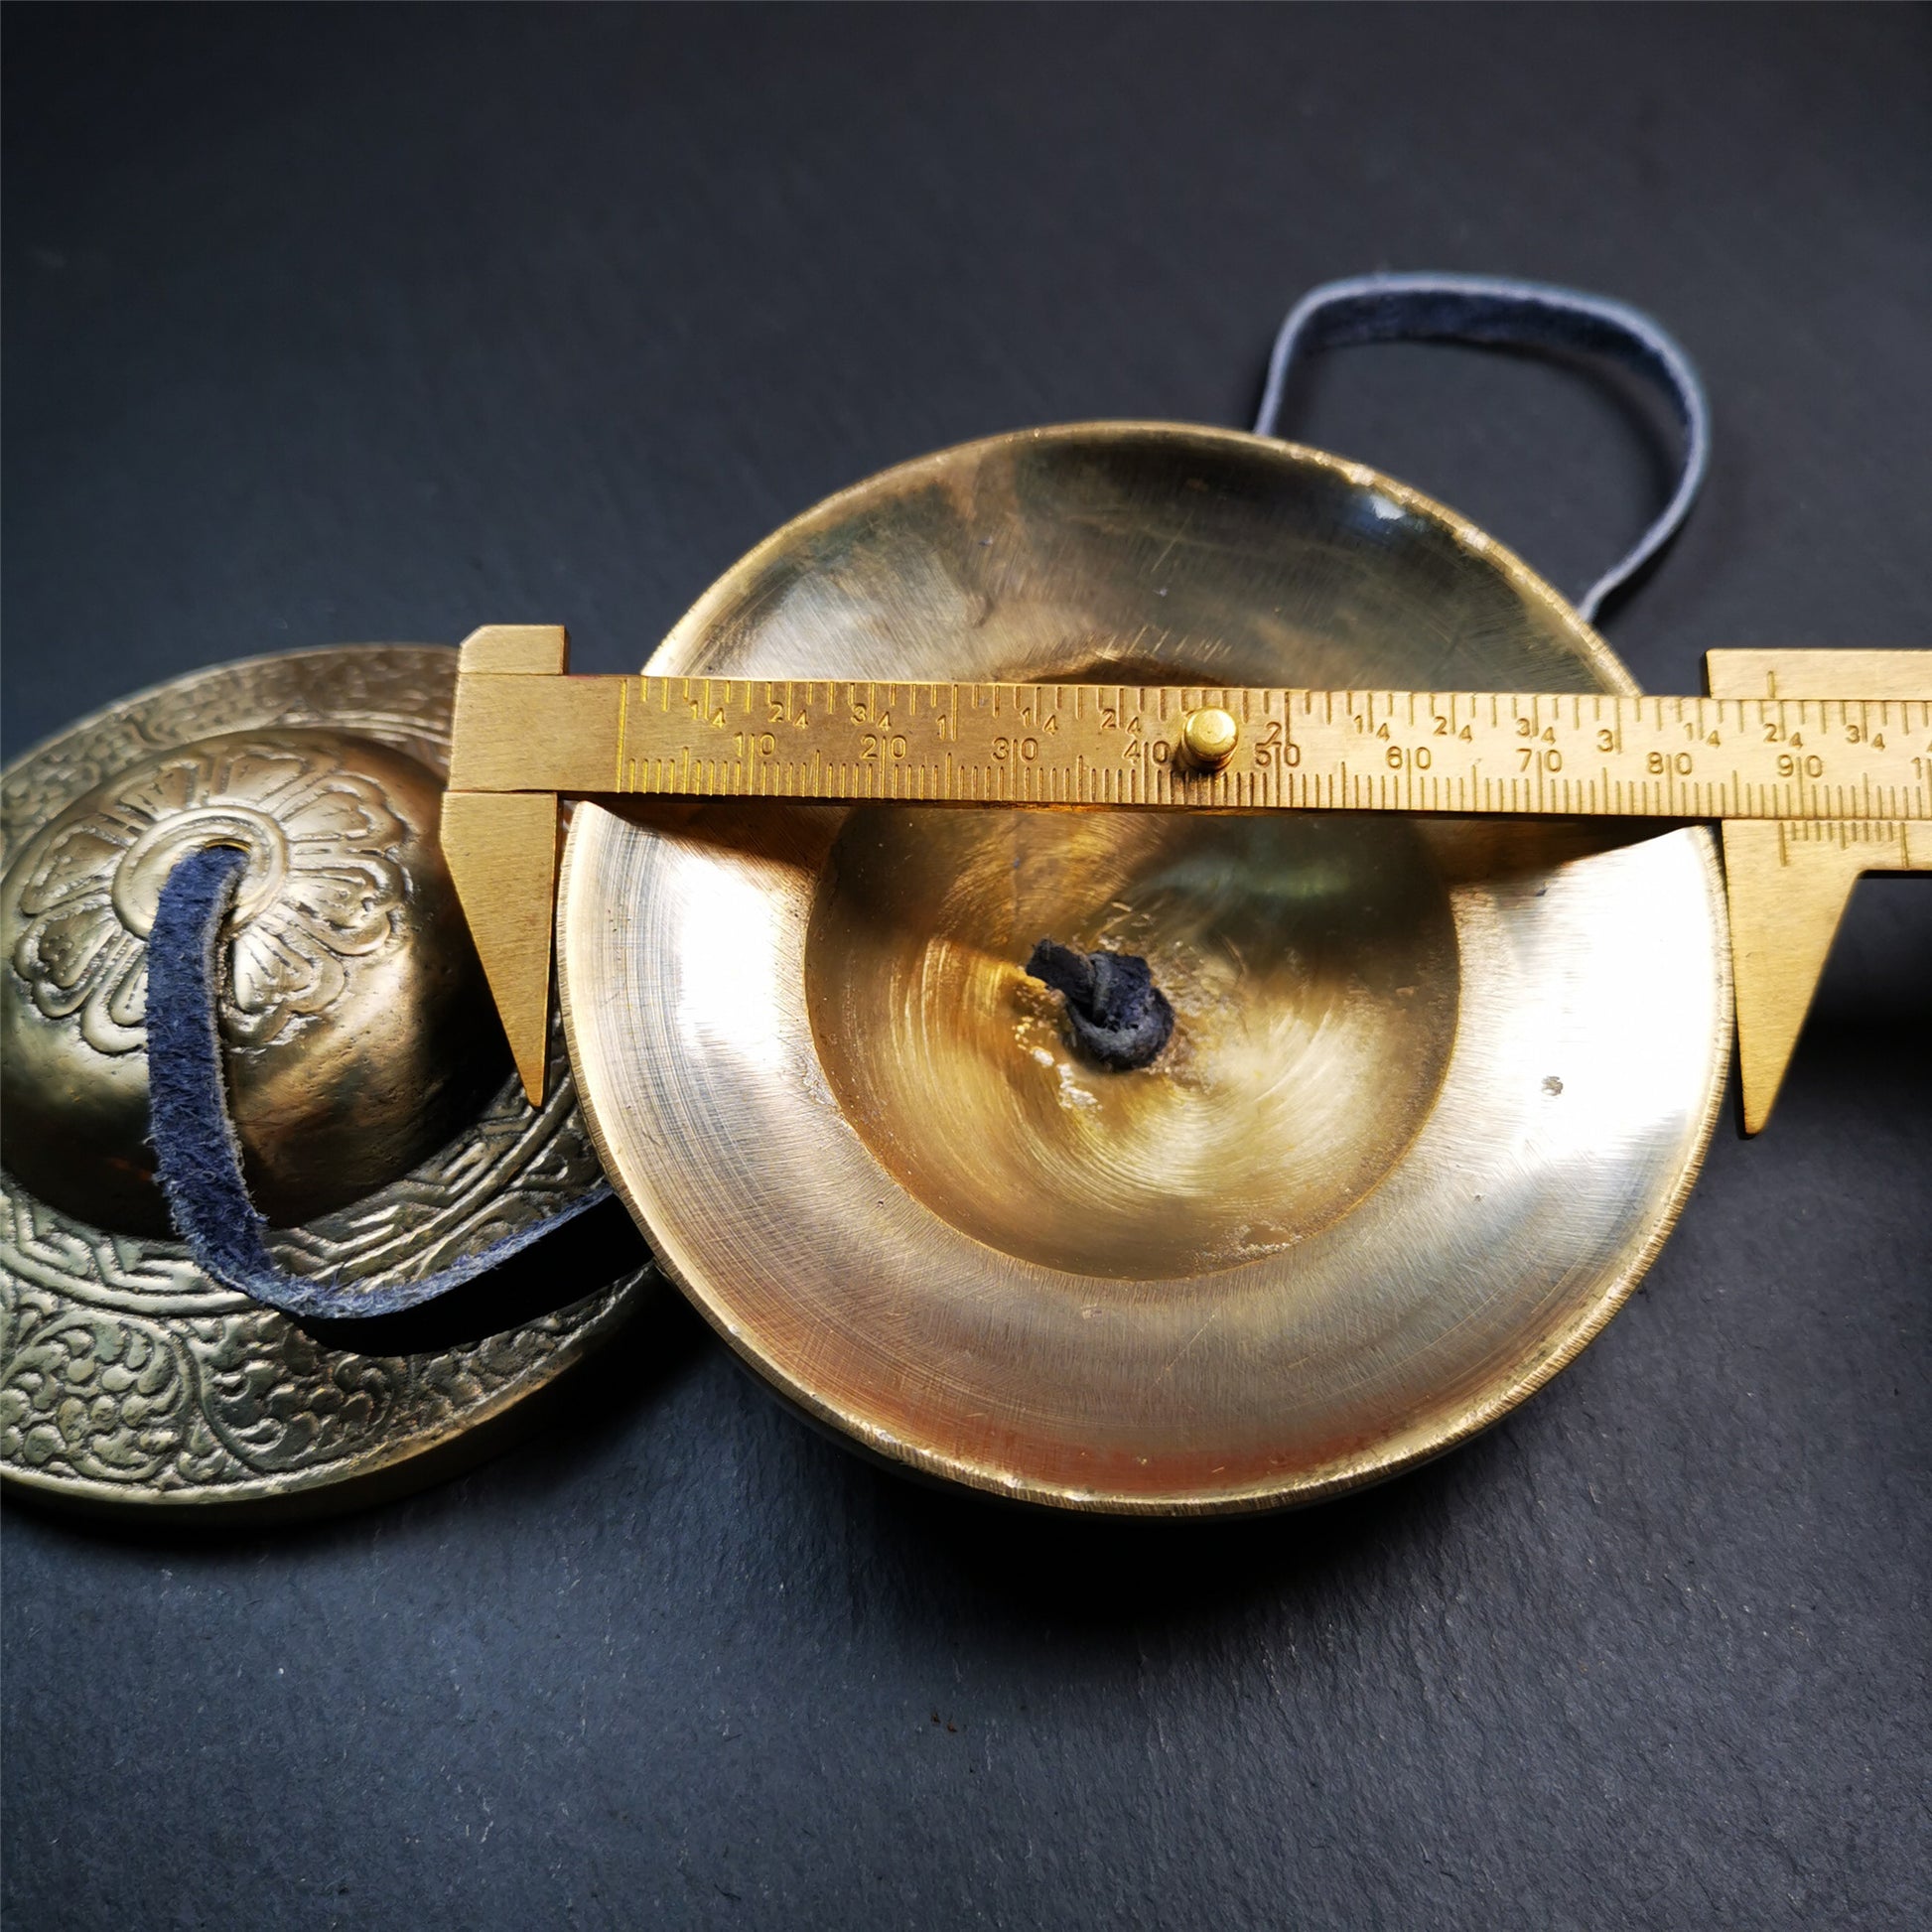 This tingsha bell set was handmade in Nepal,using traditional techniques and materials. It was made of bronze,carved cloud pattern,8.8cm diameter,with pure, clear and resonant,good for meditation. Come with tingsha case.